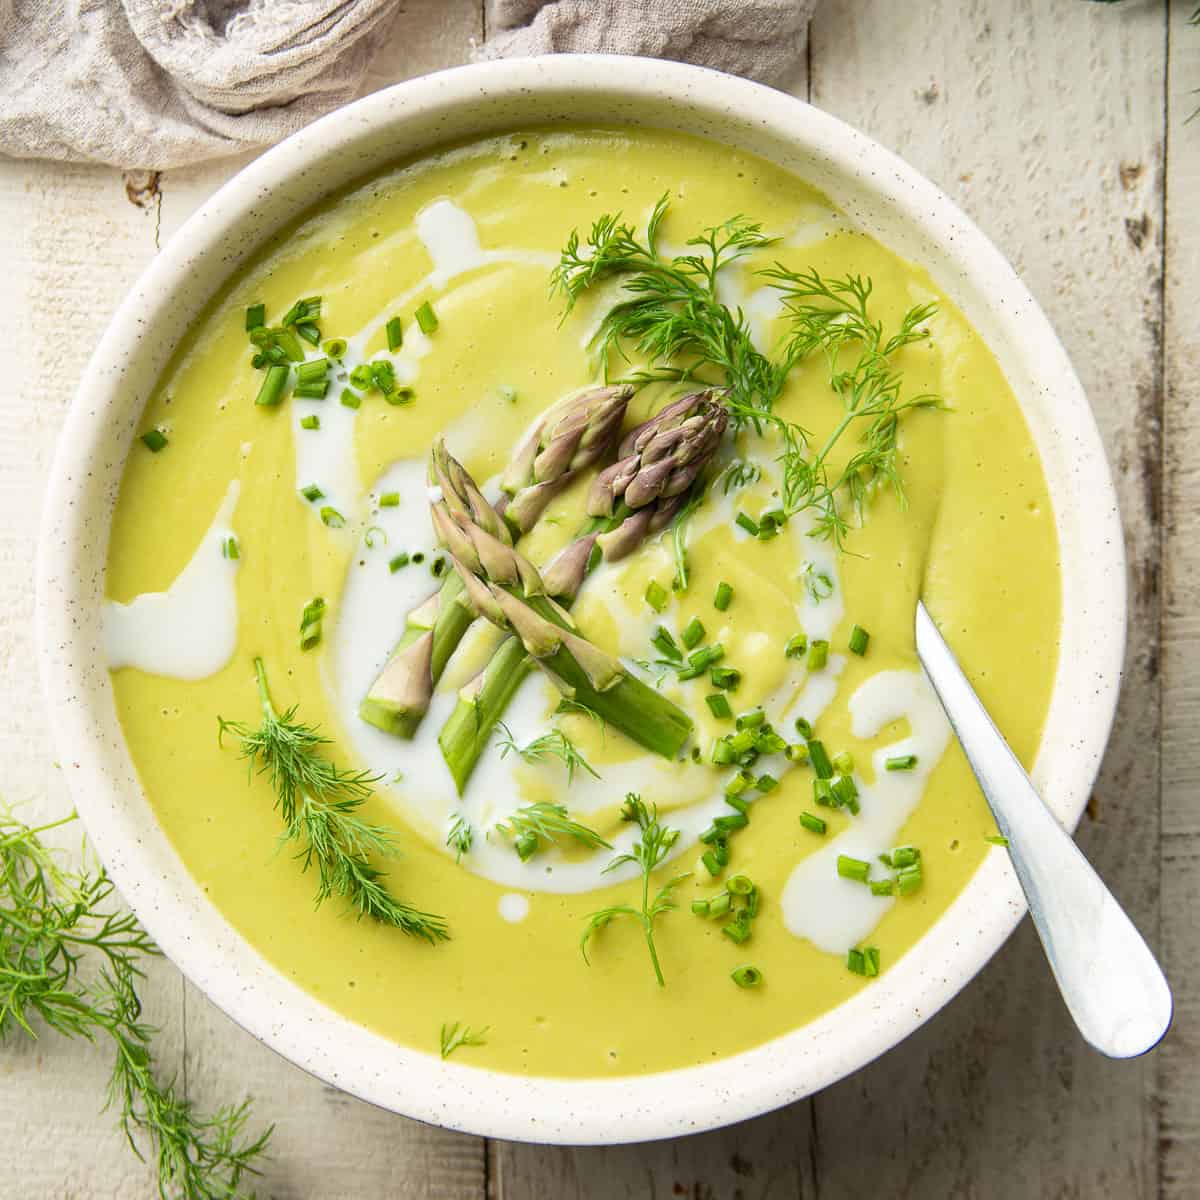 Bowl of Vegan Cream of Asparagus Soup topped with dill, chives, and asparagus tips.